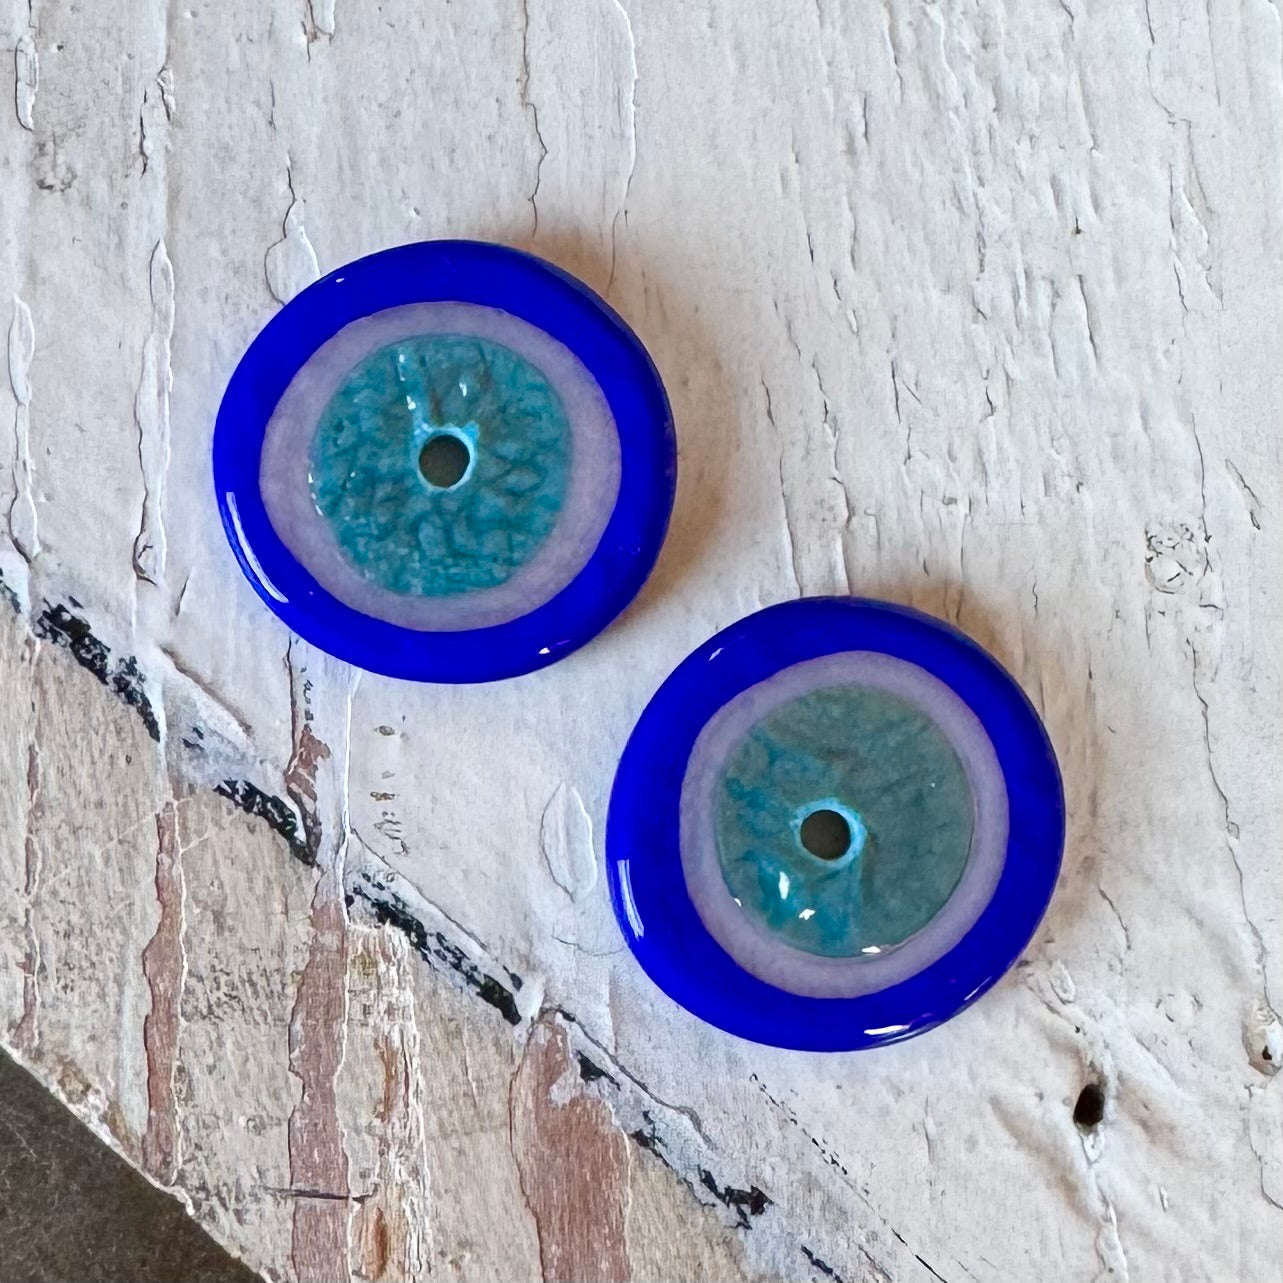 TEXTURED DISCS - Turquoise, Pink, Blue